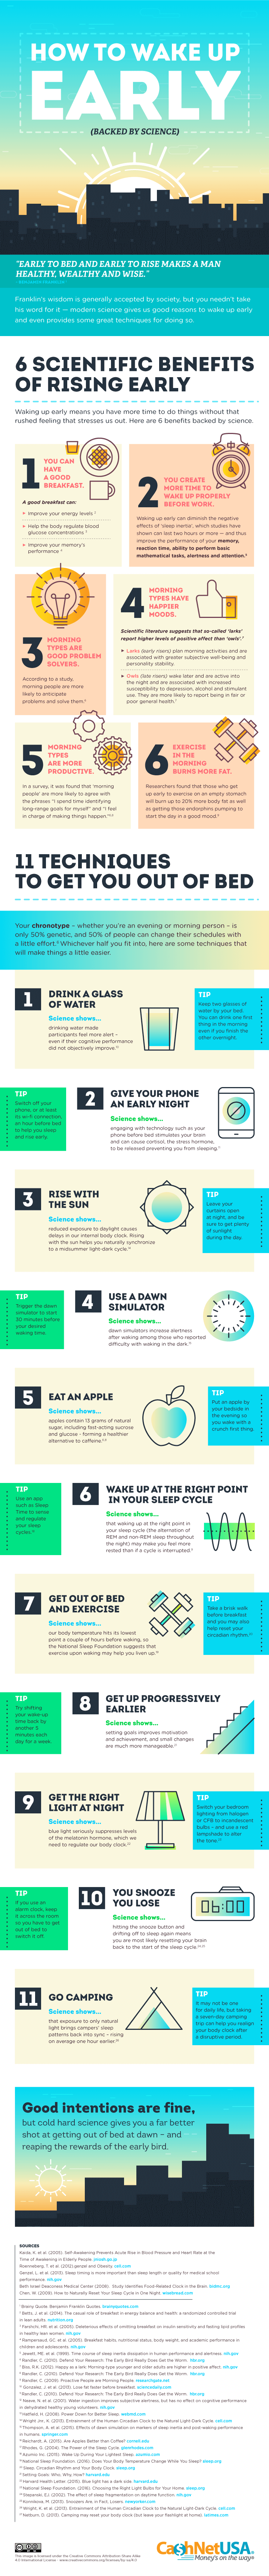 How to Wake Up Early (Backed by Science)